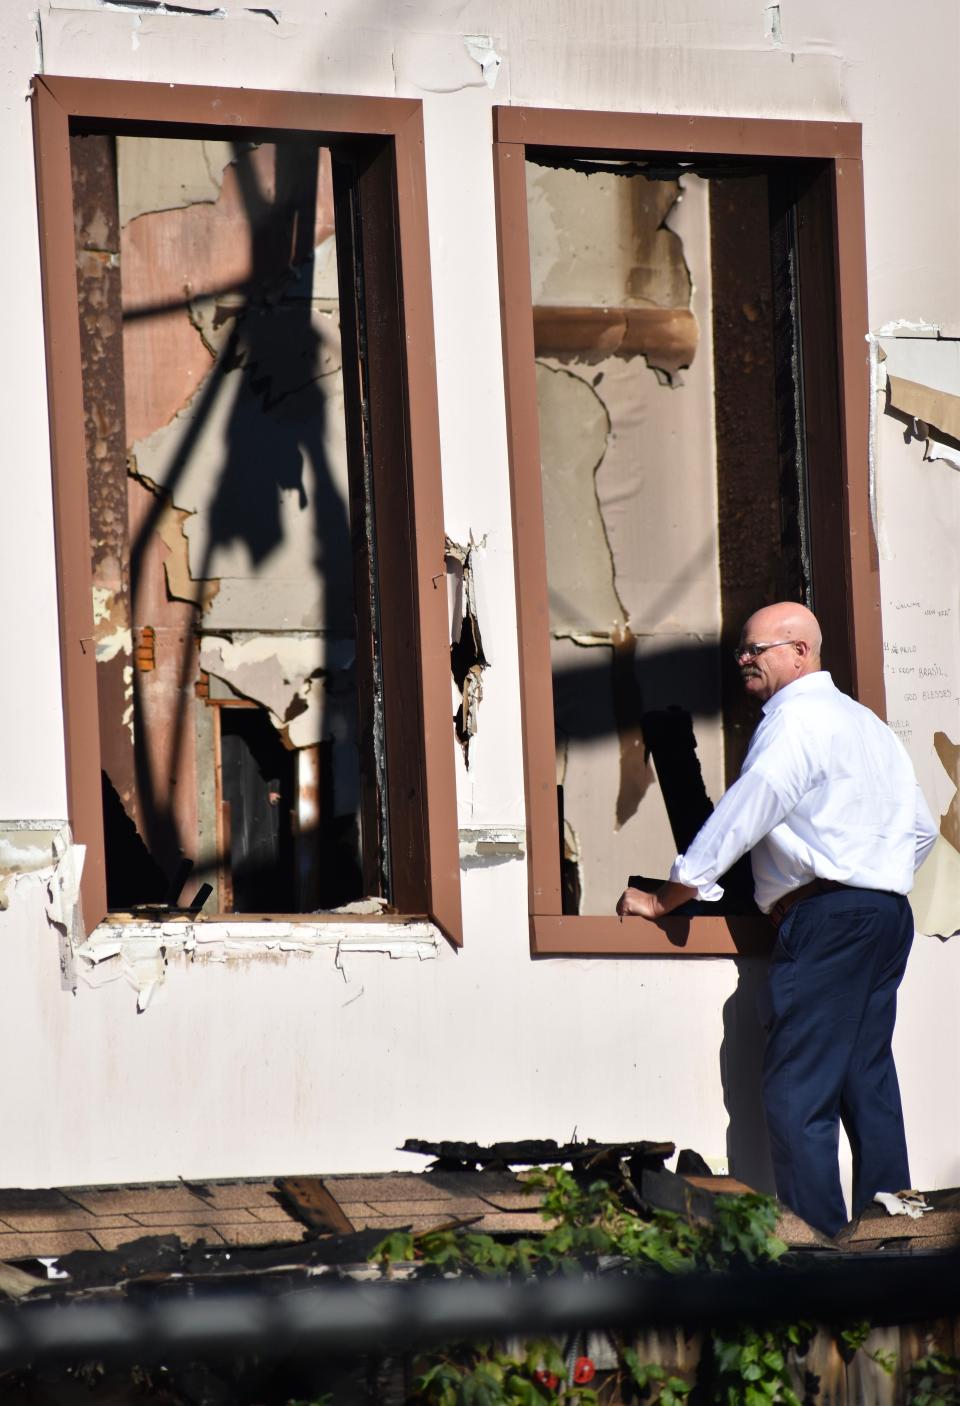 Fall River Fire Department Chief Roger St. Martin was on scene at 277 Brightman St. Wednesday morning following a massive fire Tuesday evening in the former Royal Theater building.